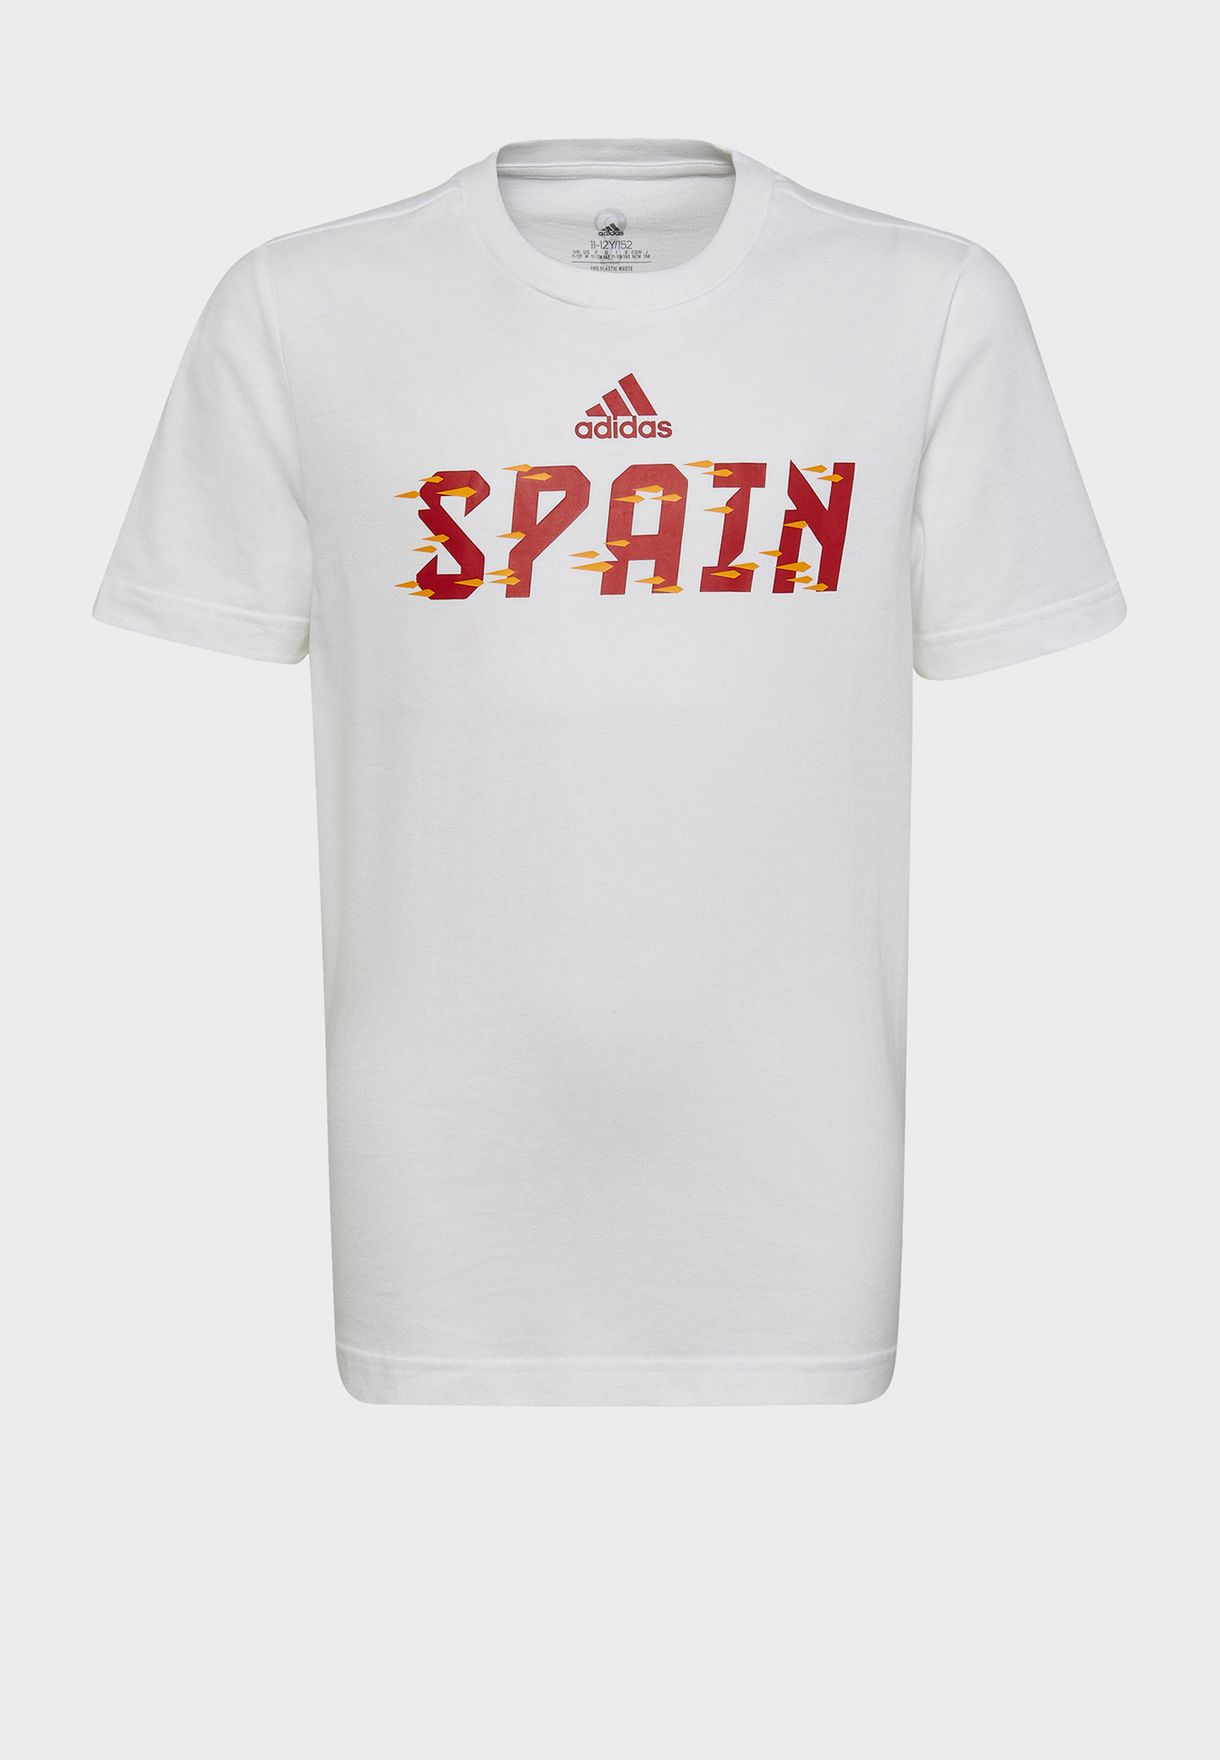 Youth Spain T-Shirt